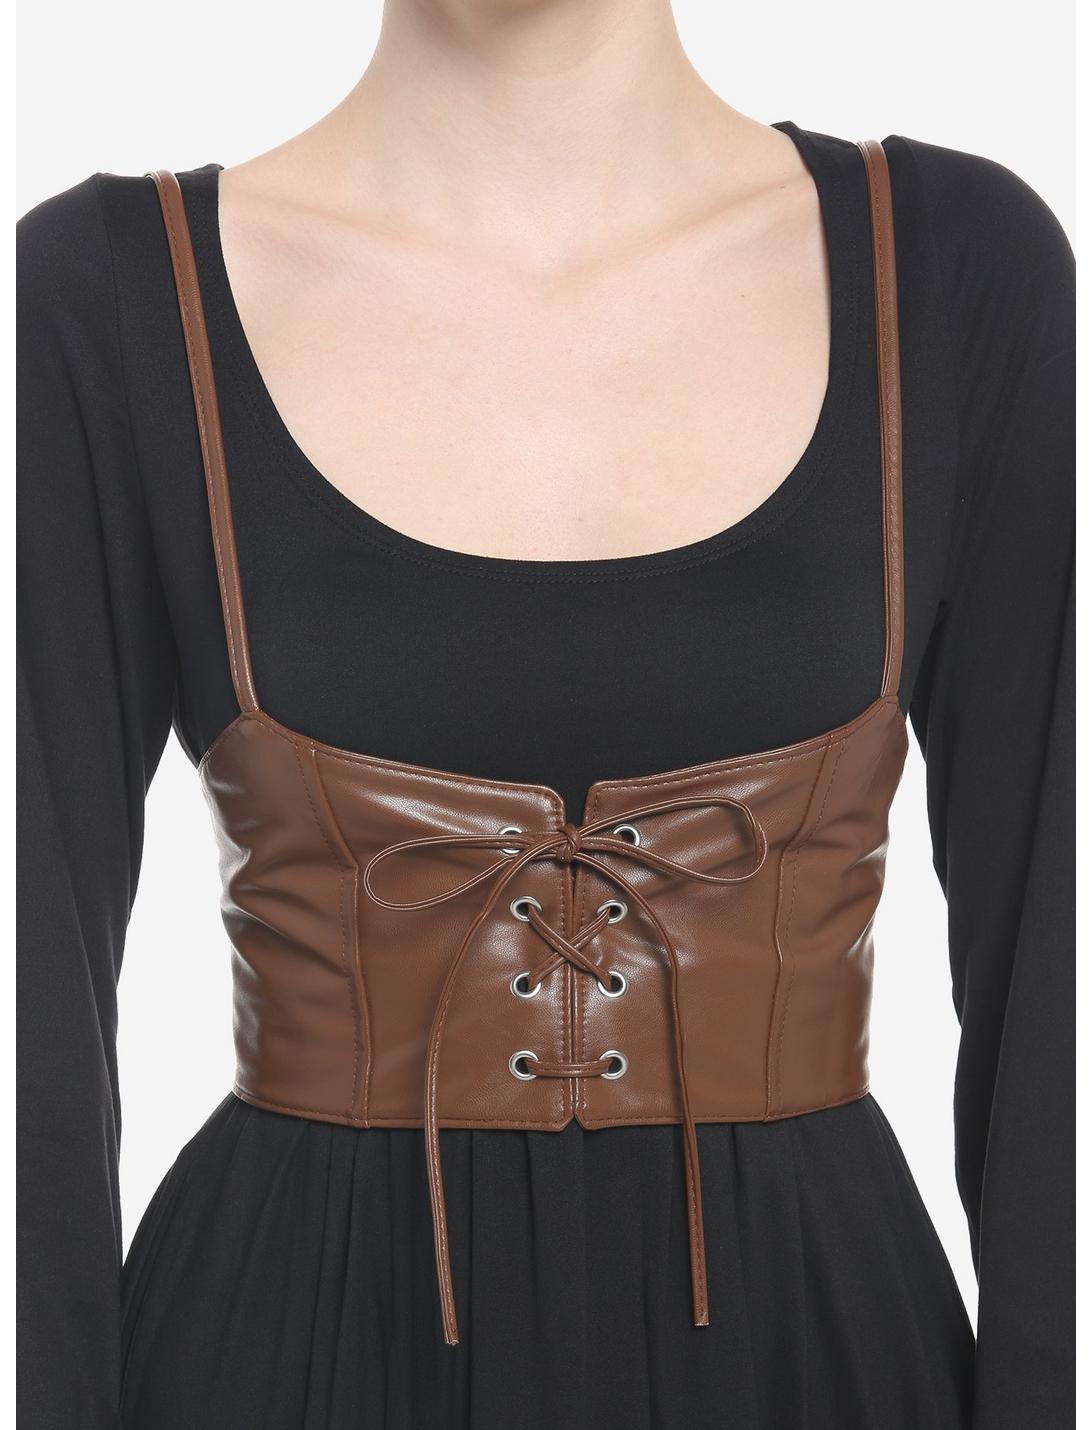 Brown Faux Leather Corset-Style Harness, BROWN, hi-res